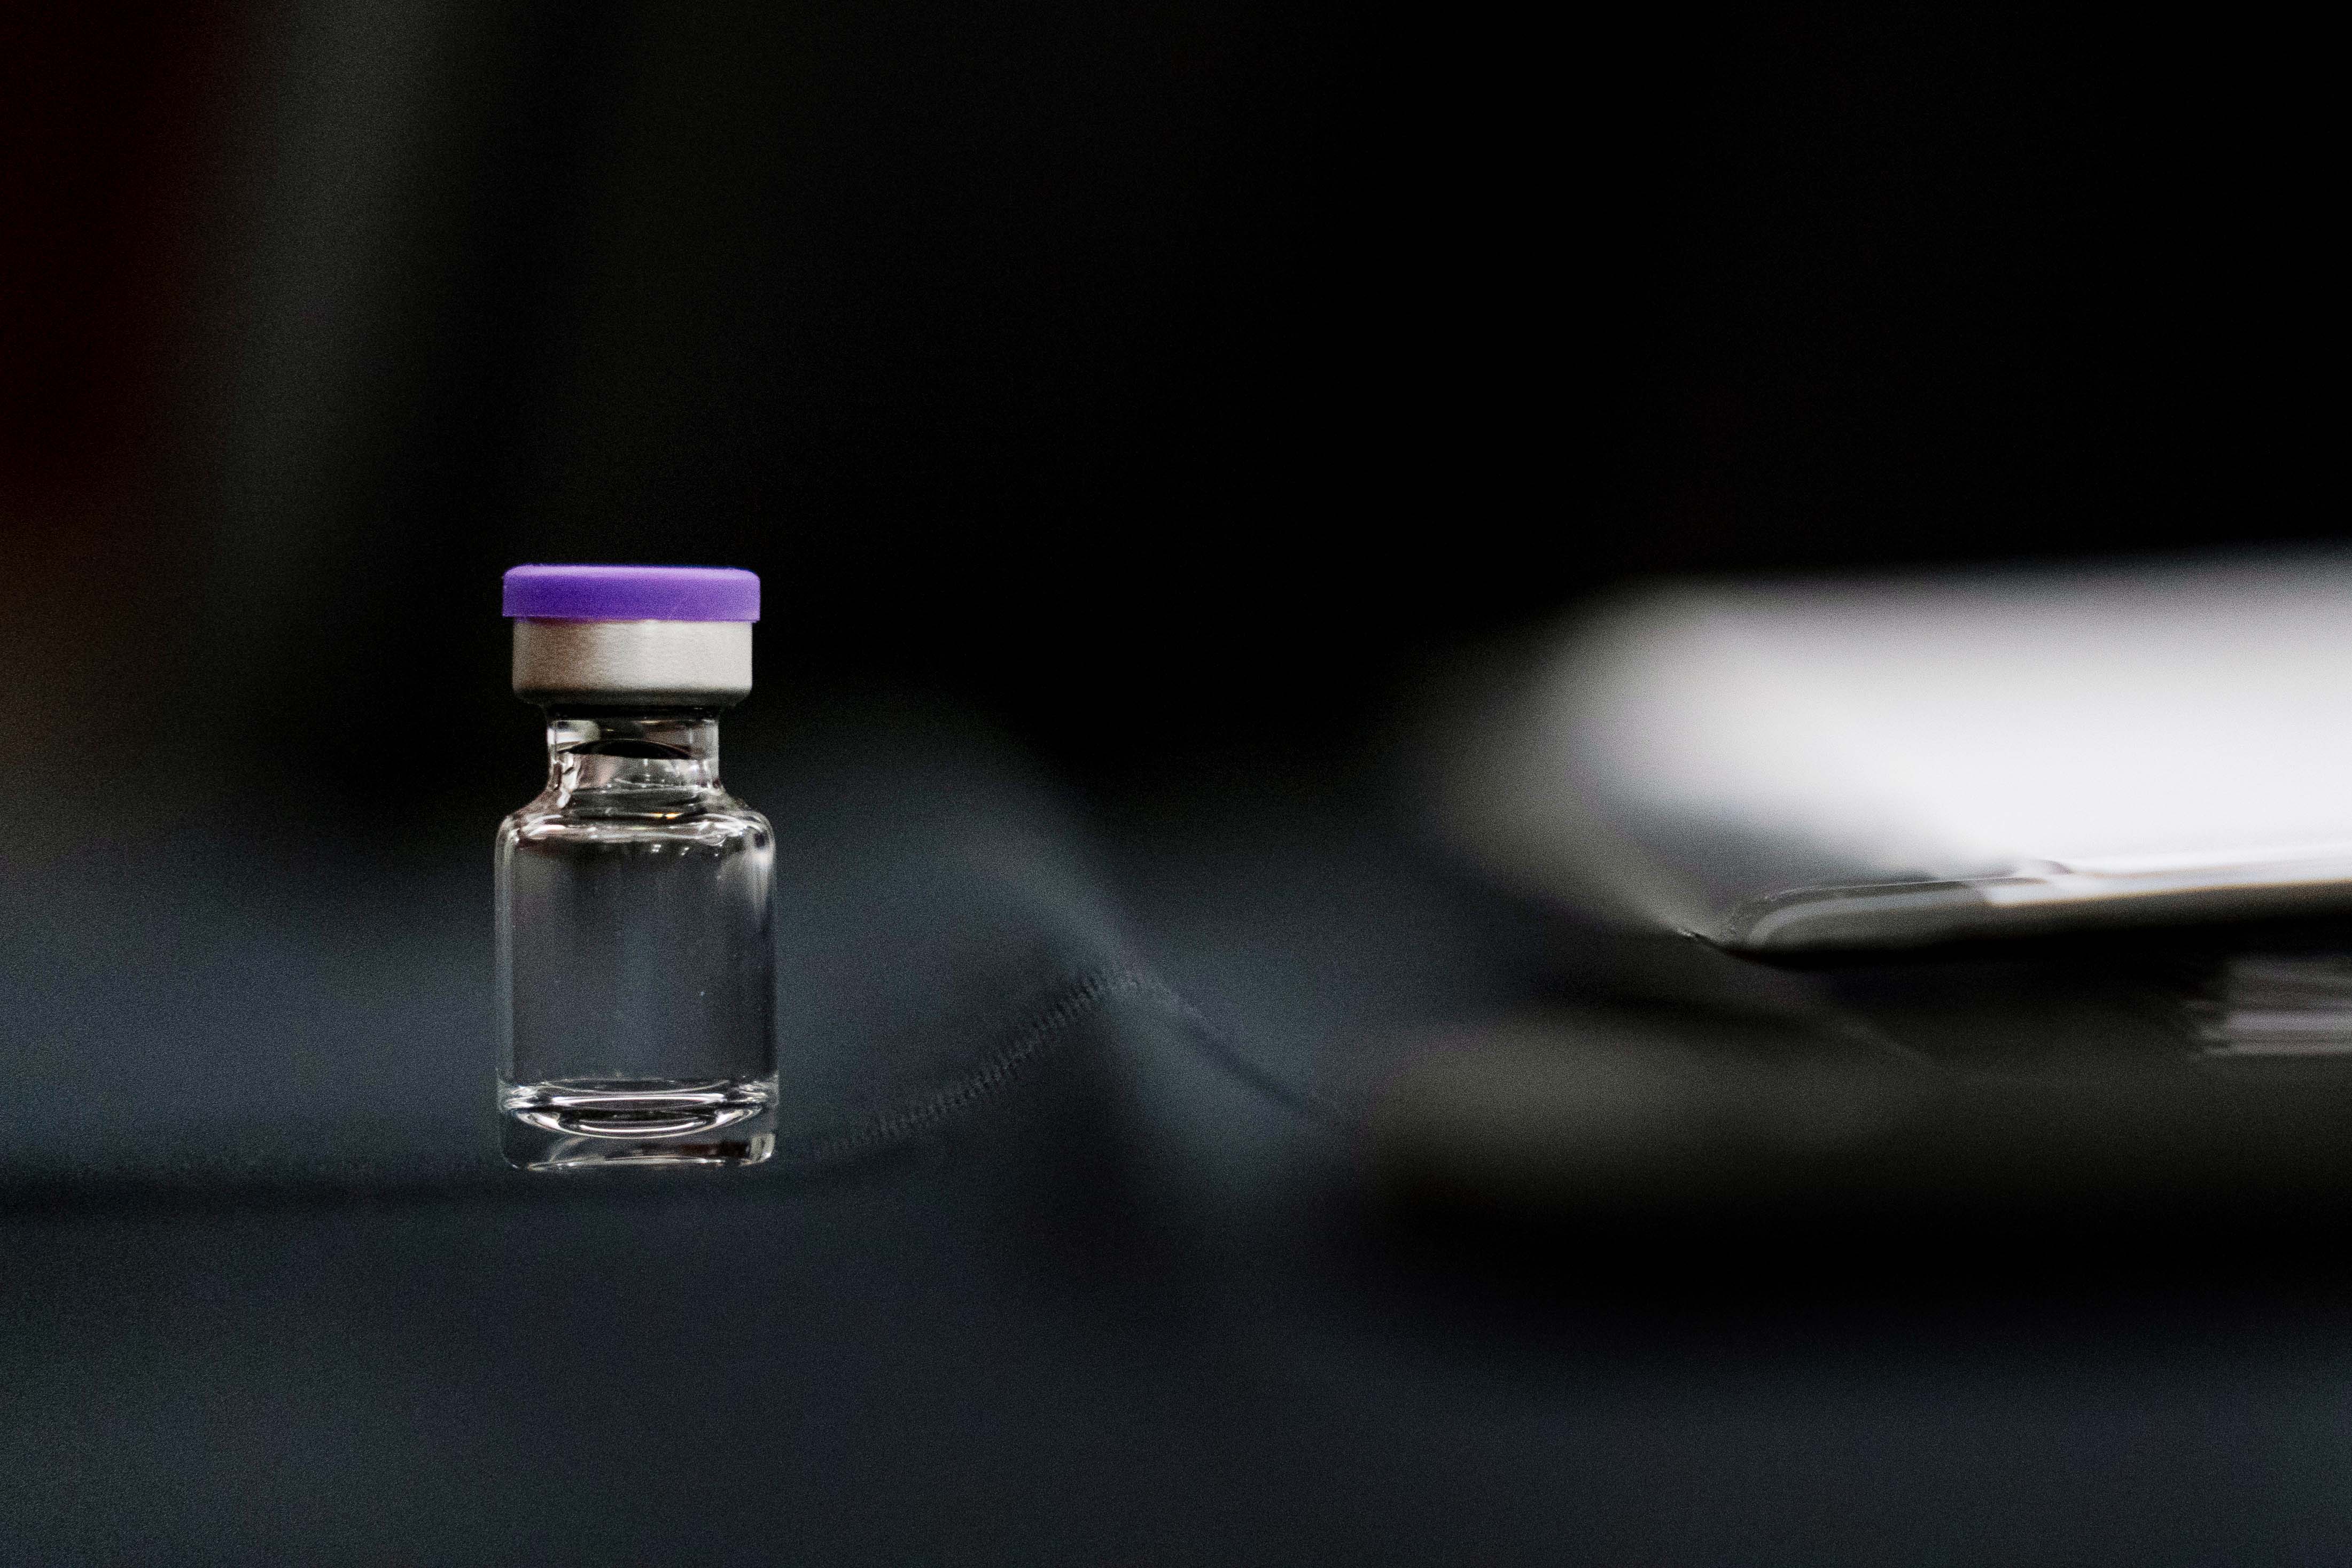 A vial of vaccine on a desk.